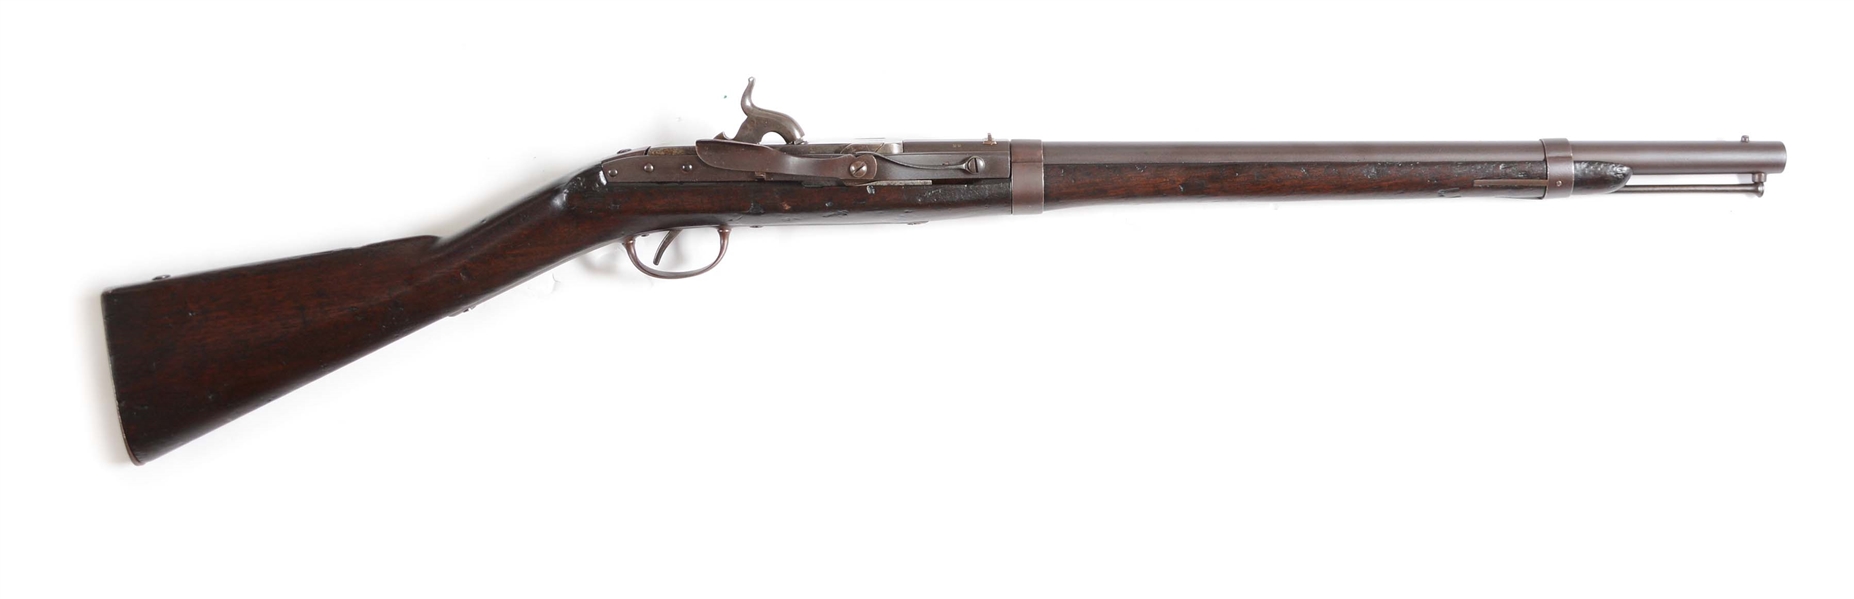 (A) S. NORTH 1843 SIDE LEVER HALL CARBINE DATED 1852, RIFLED.